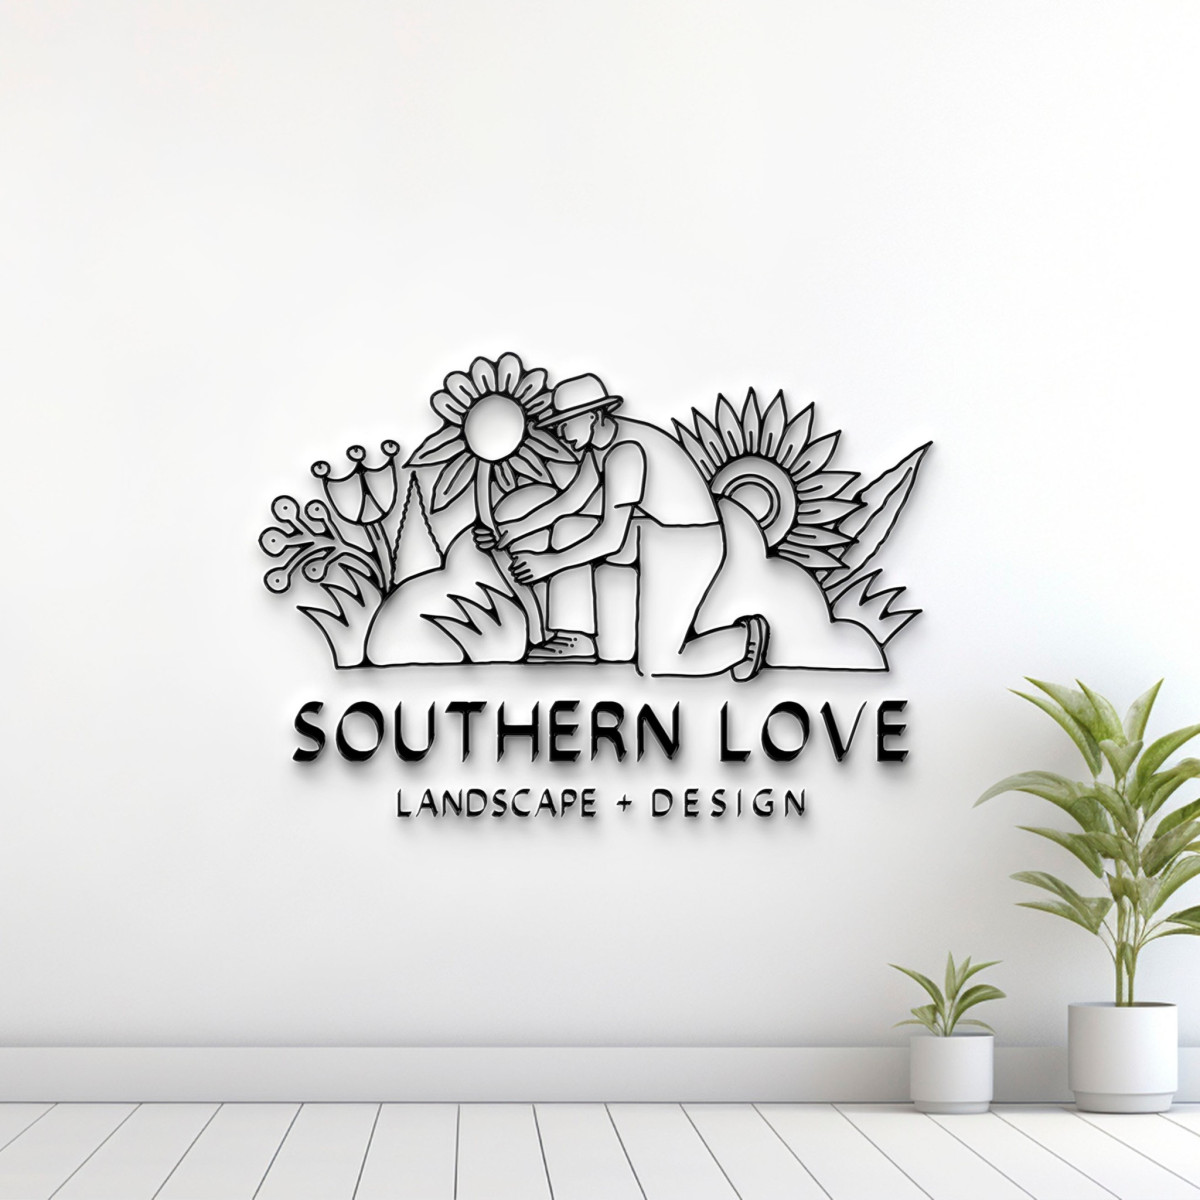 Southern Love Landscaping & Design